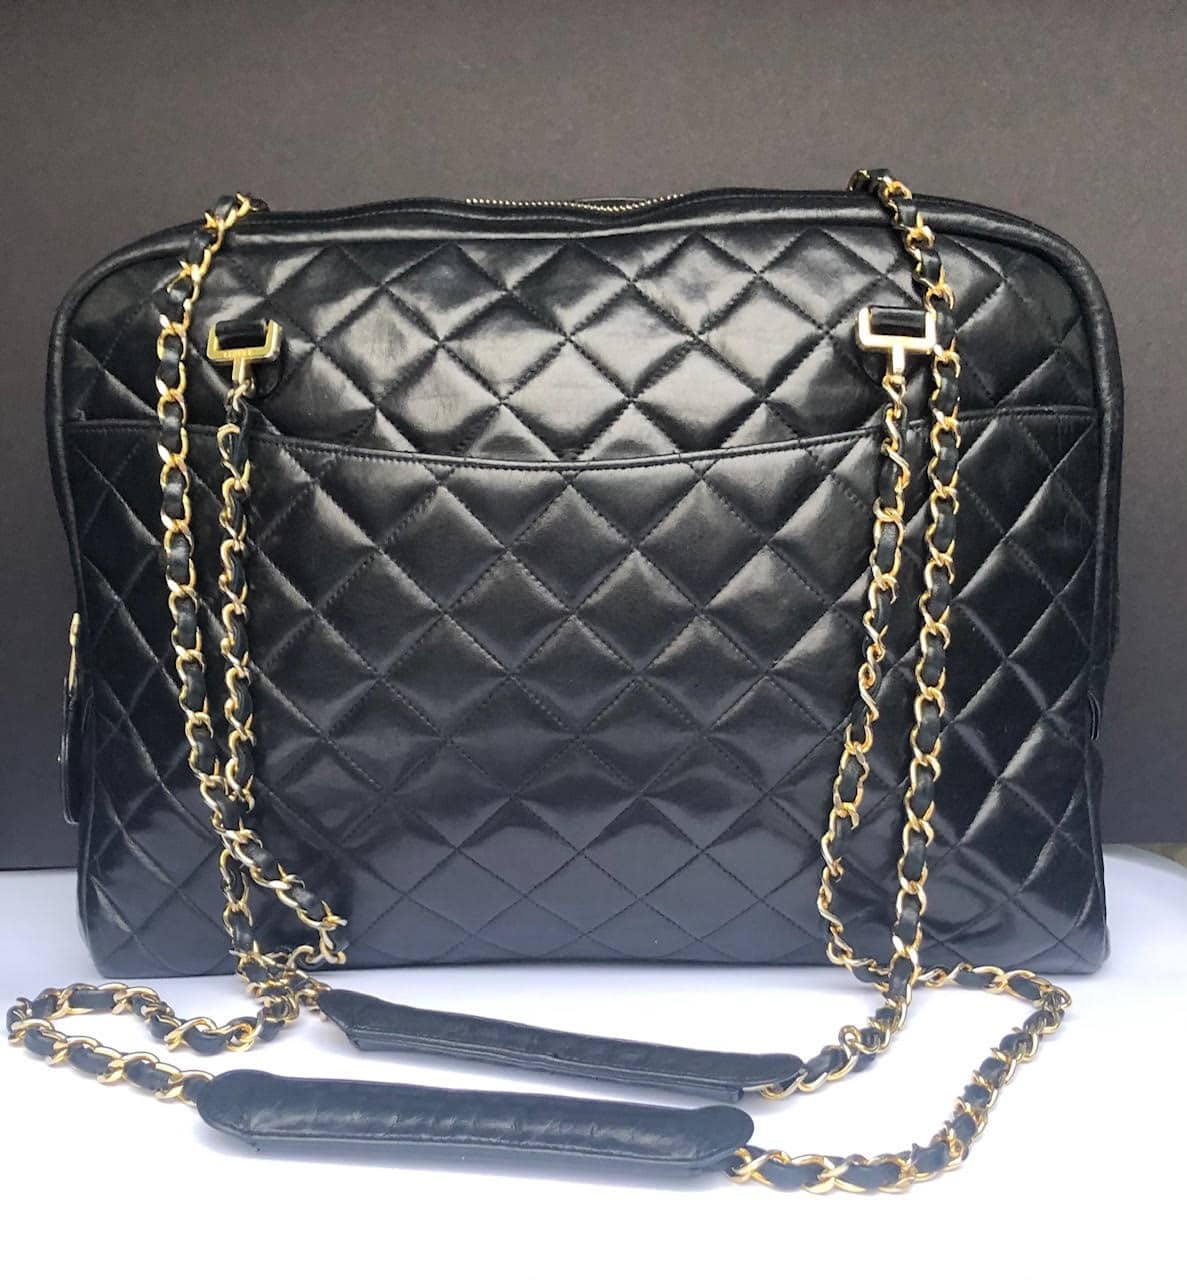 CHANEL Timeless Bag Quilted Leather Lambskin Maxi Vintage 1989